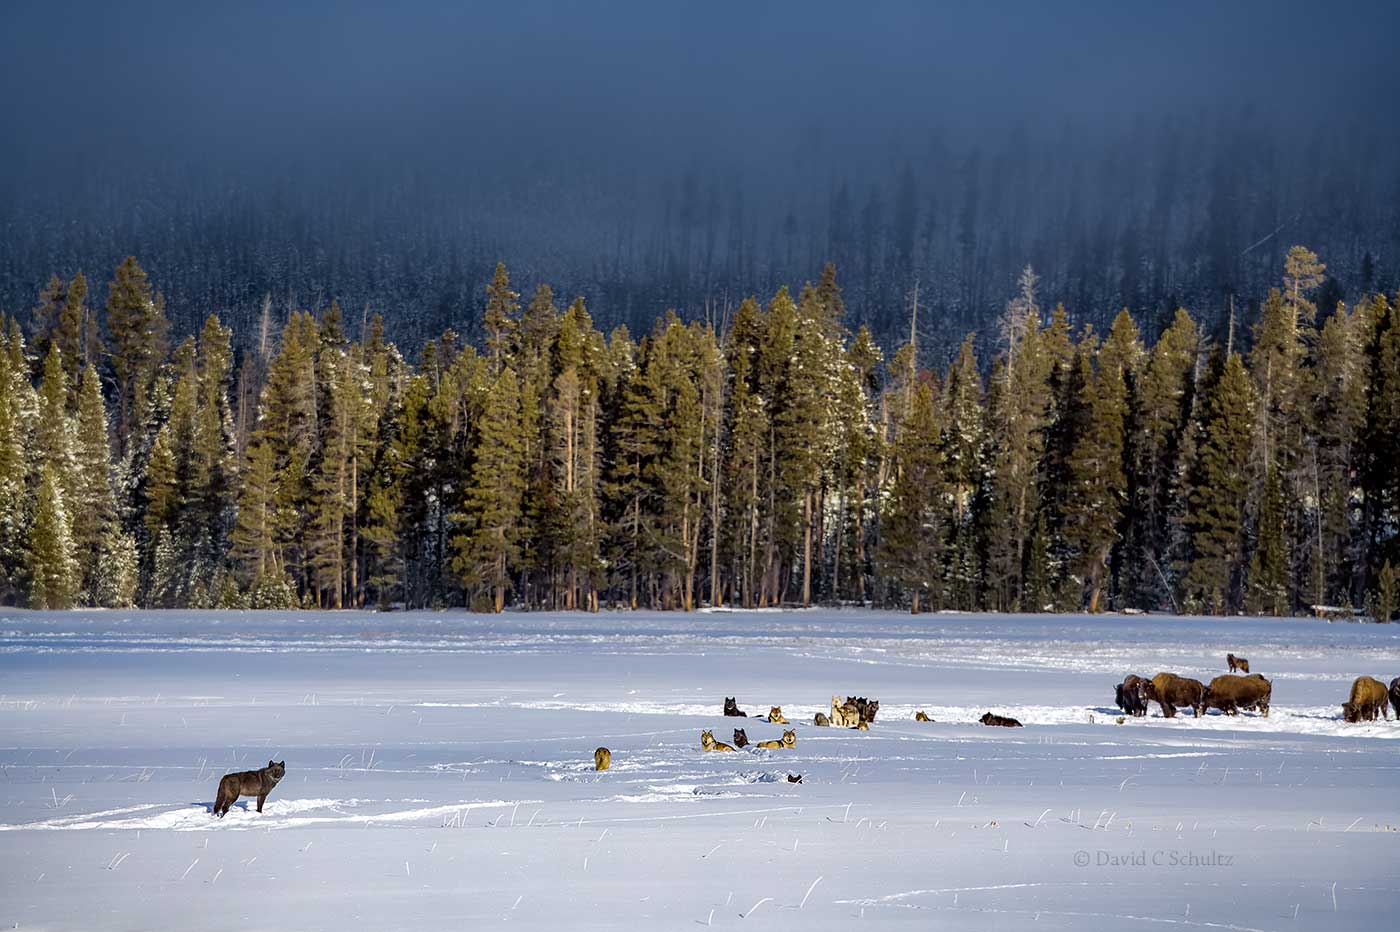 Wolves in Yellowstone National Park - Image #161-10770